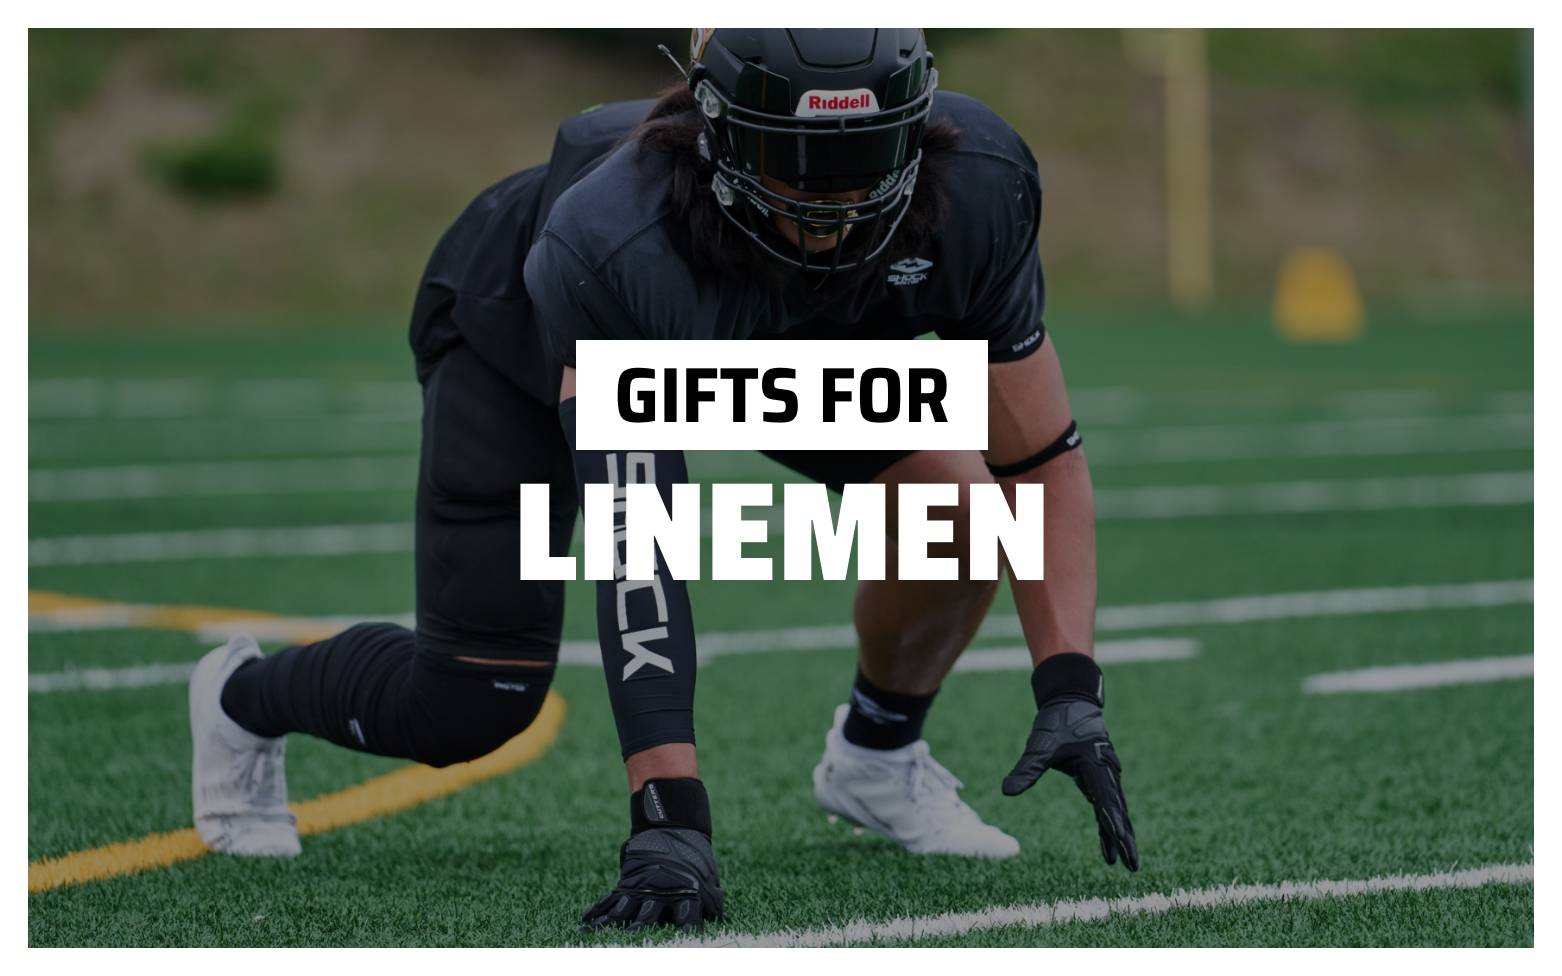 GIFTS FOR LINEMEN